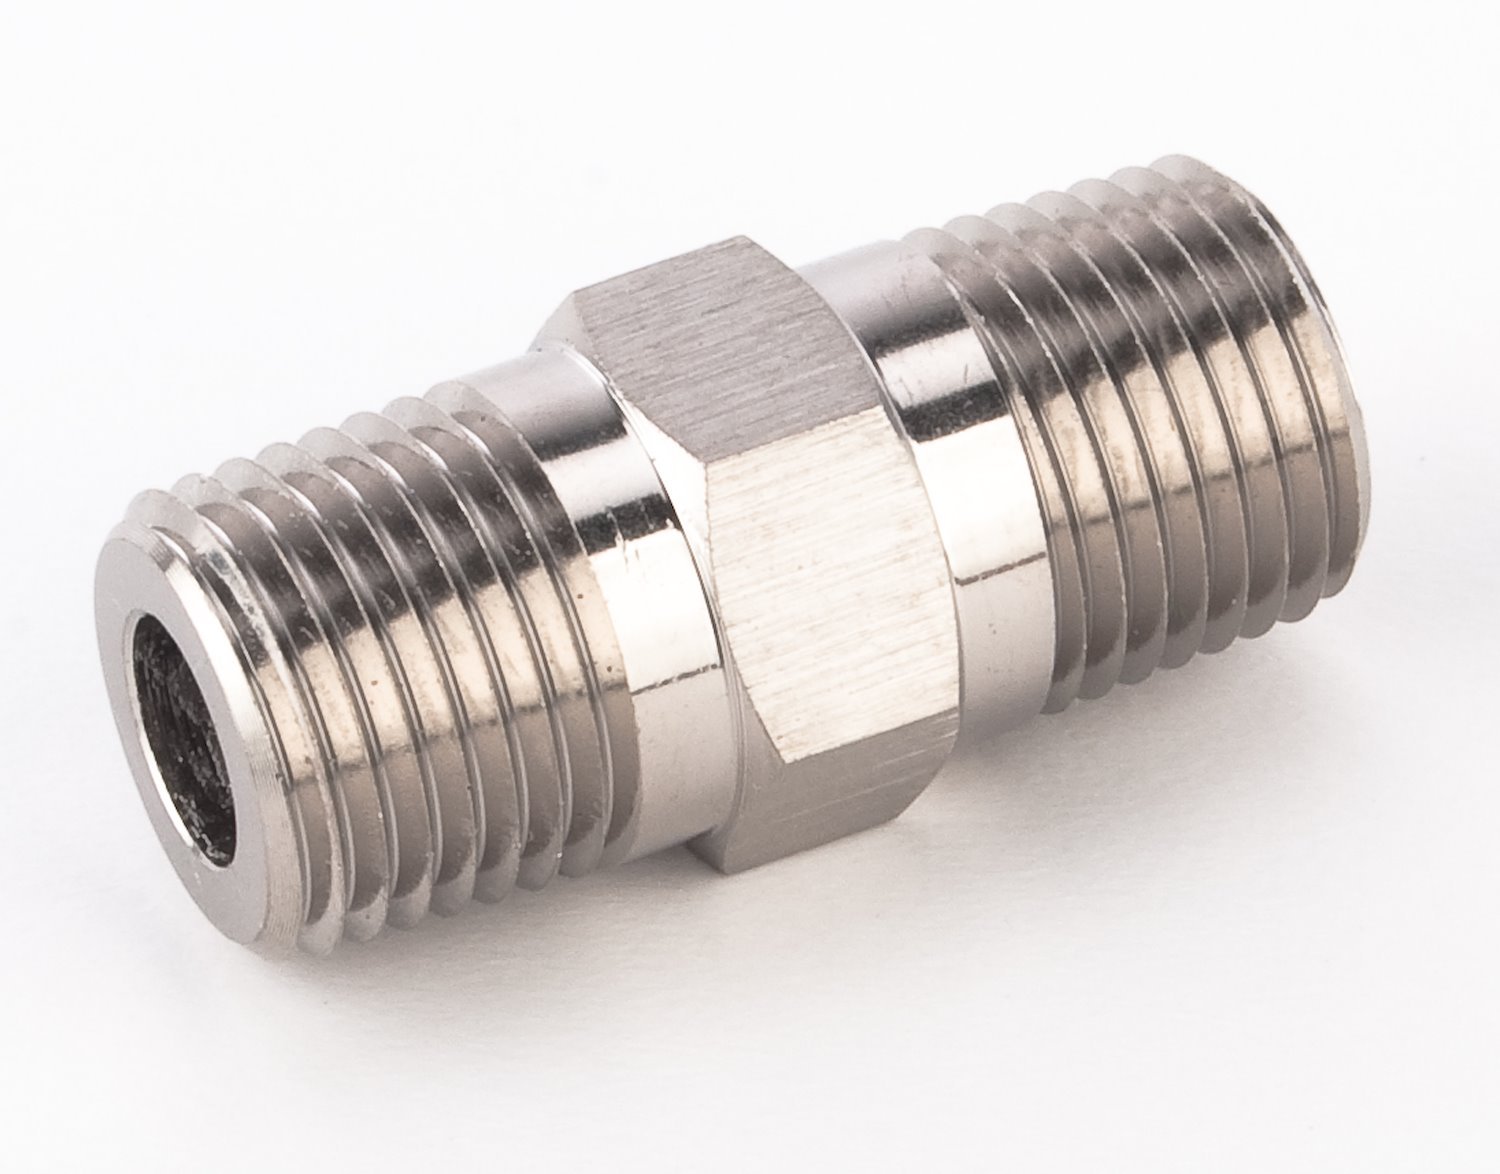 NPT to NPT Straight Union Fitting [1/8 in. NPT Male to 1/8 in. NPT Male, Nickle]